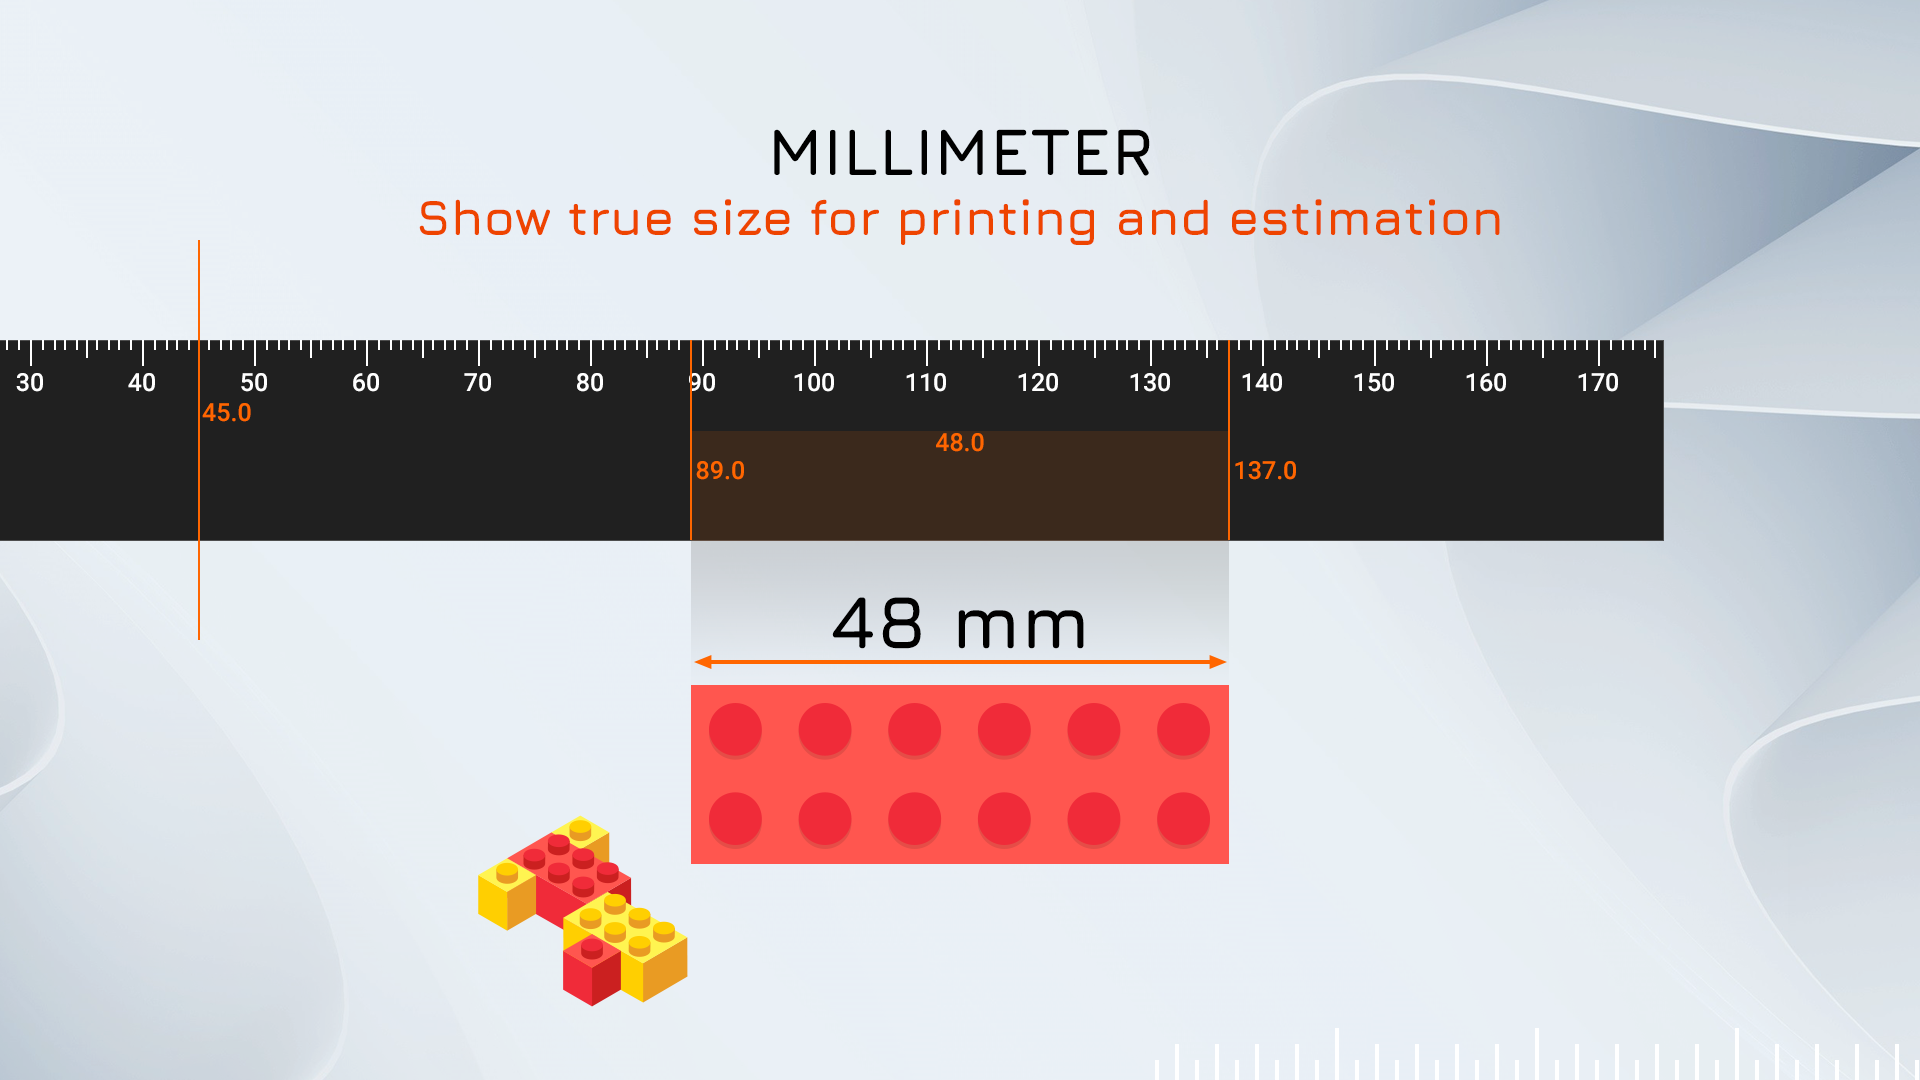 Millimeter - Show true size for printing and estimation.